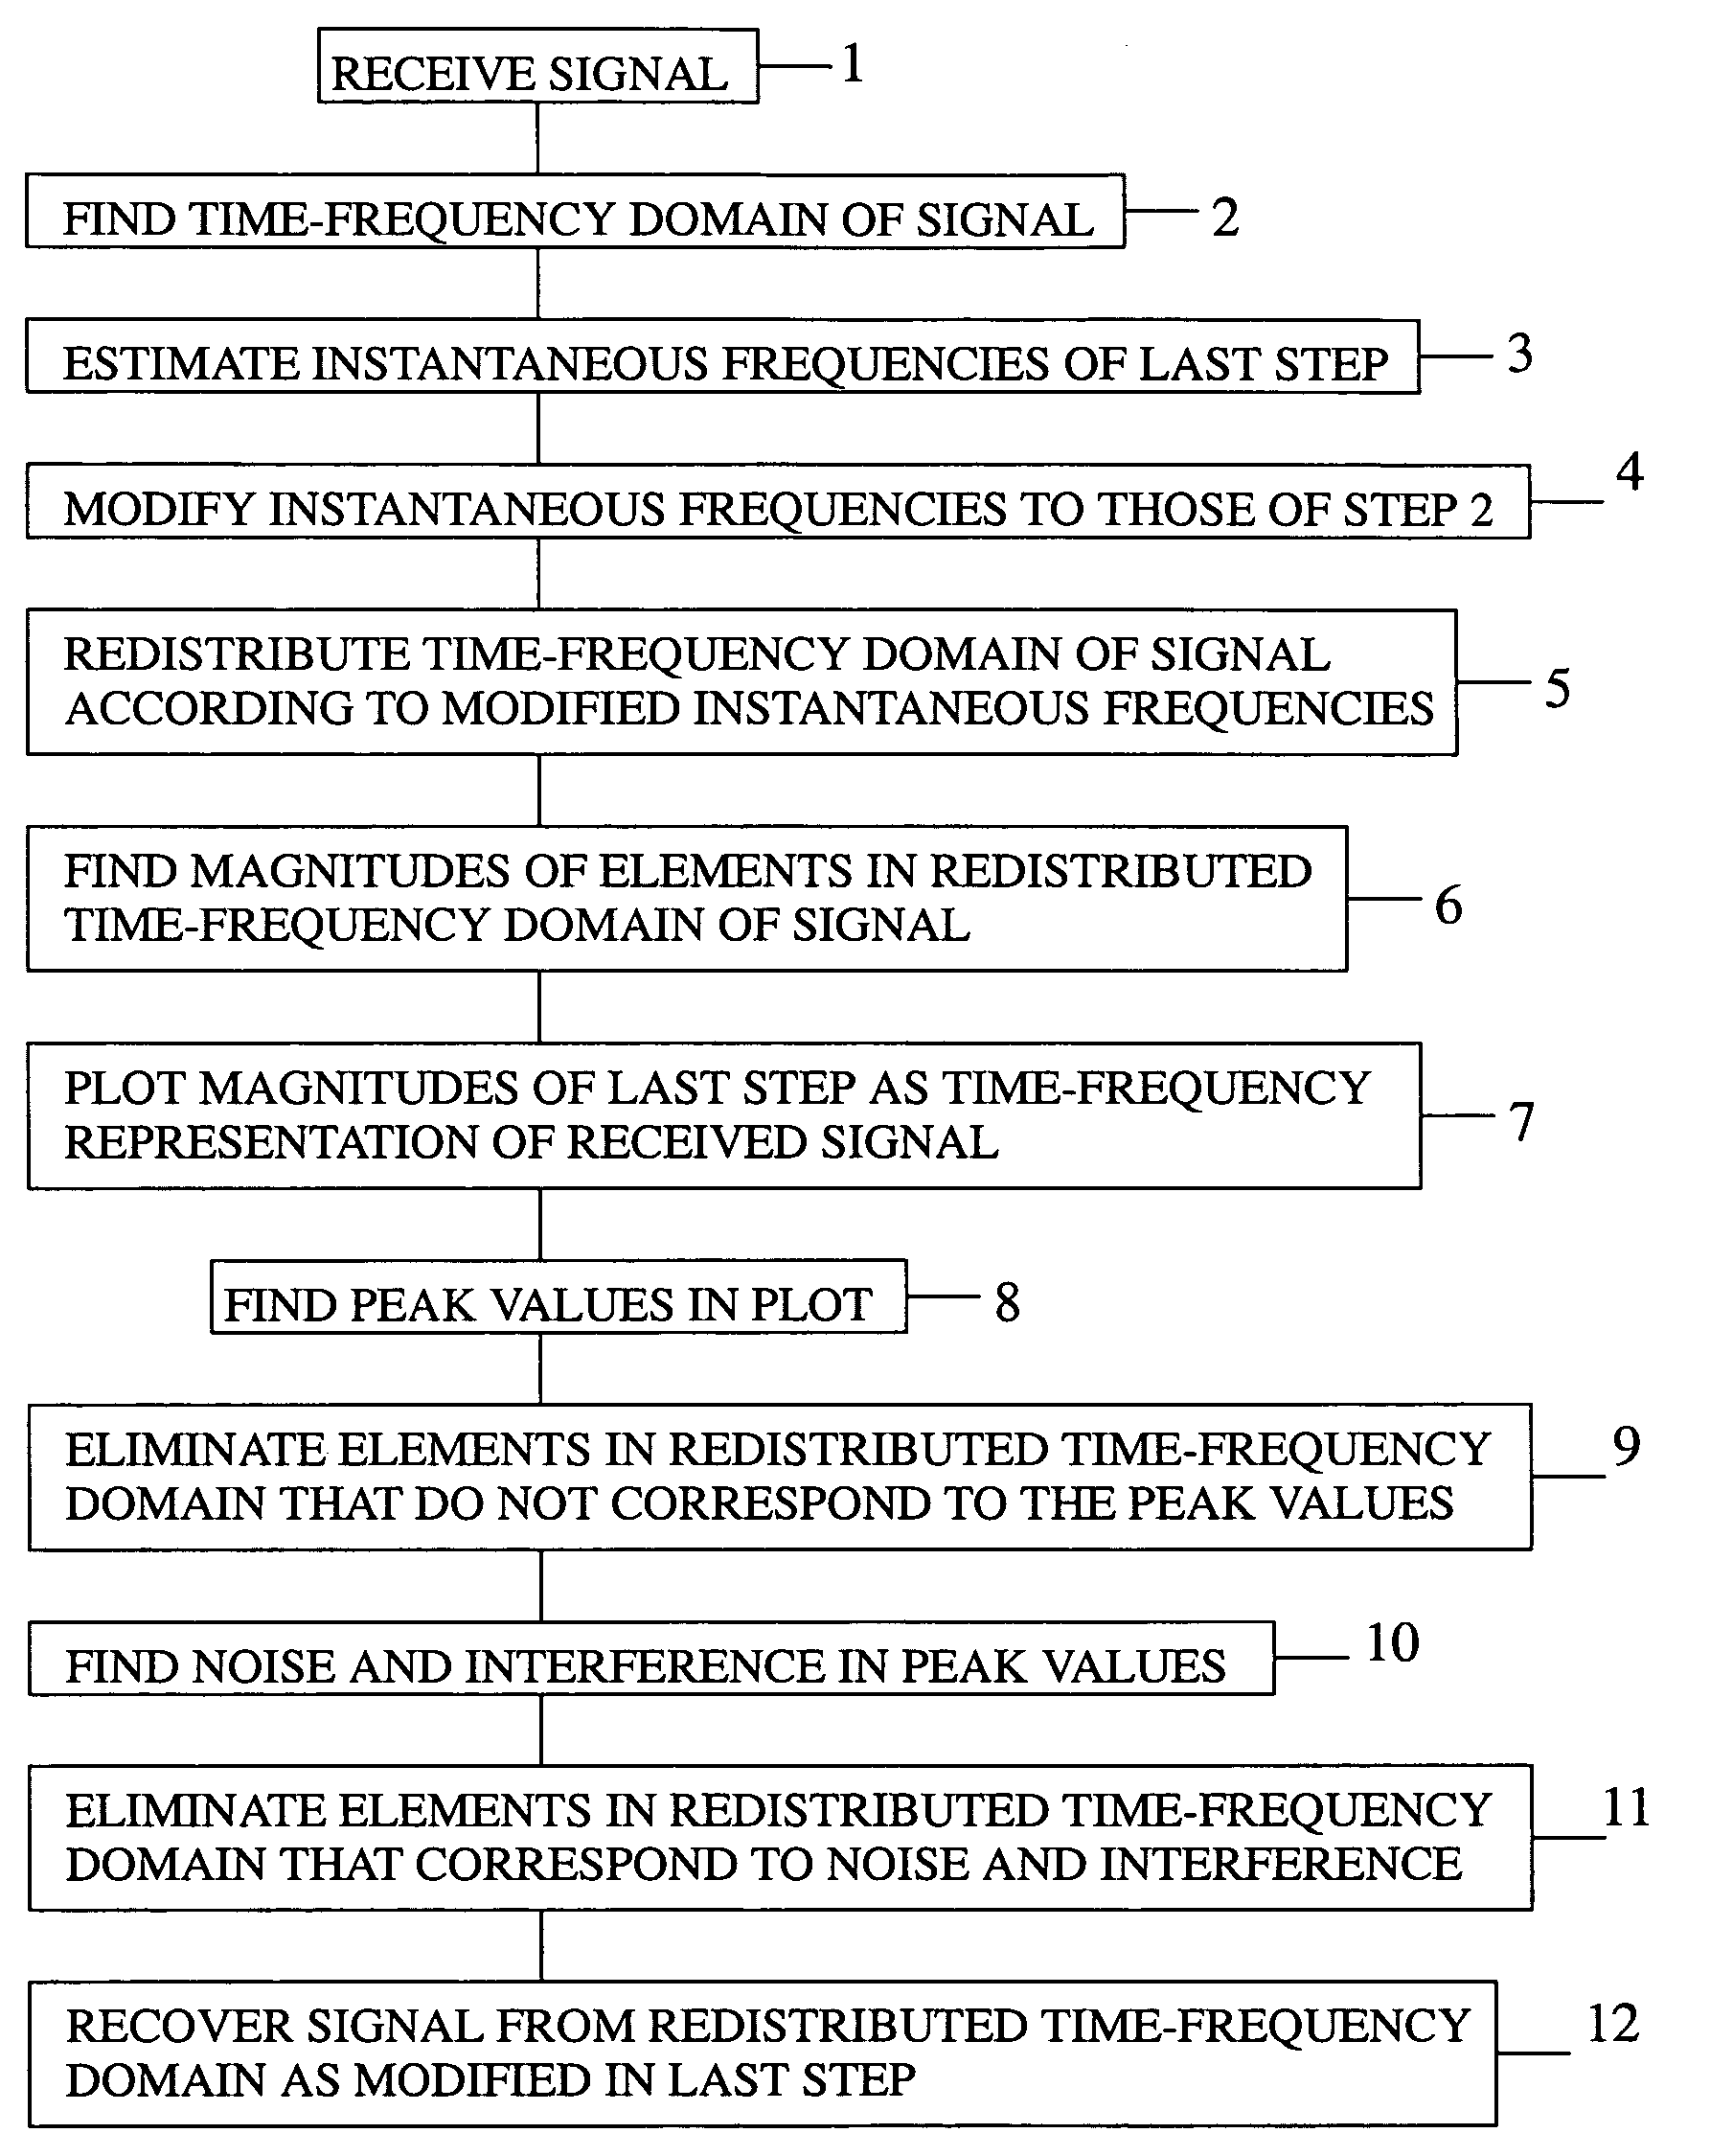 Method of removing noise and interference from signal using peak picking